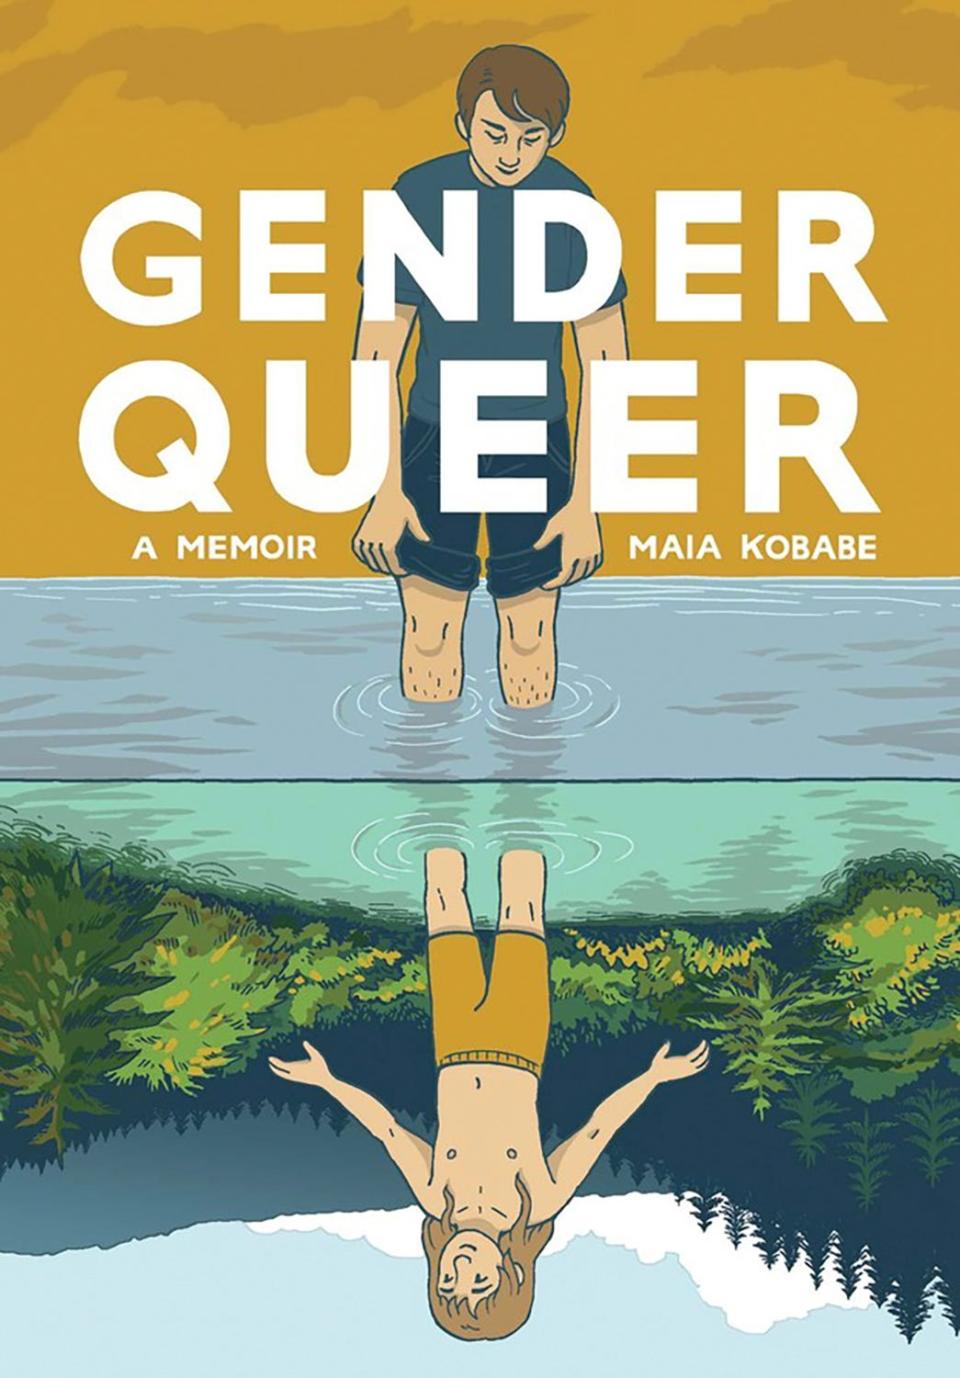 "Gender Queer" by Maia Kobabe is one of the books requested to be removed from school libraries at Old Rochester Regional high school and junior high school, according to a student at the high school.